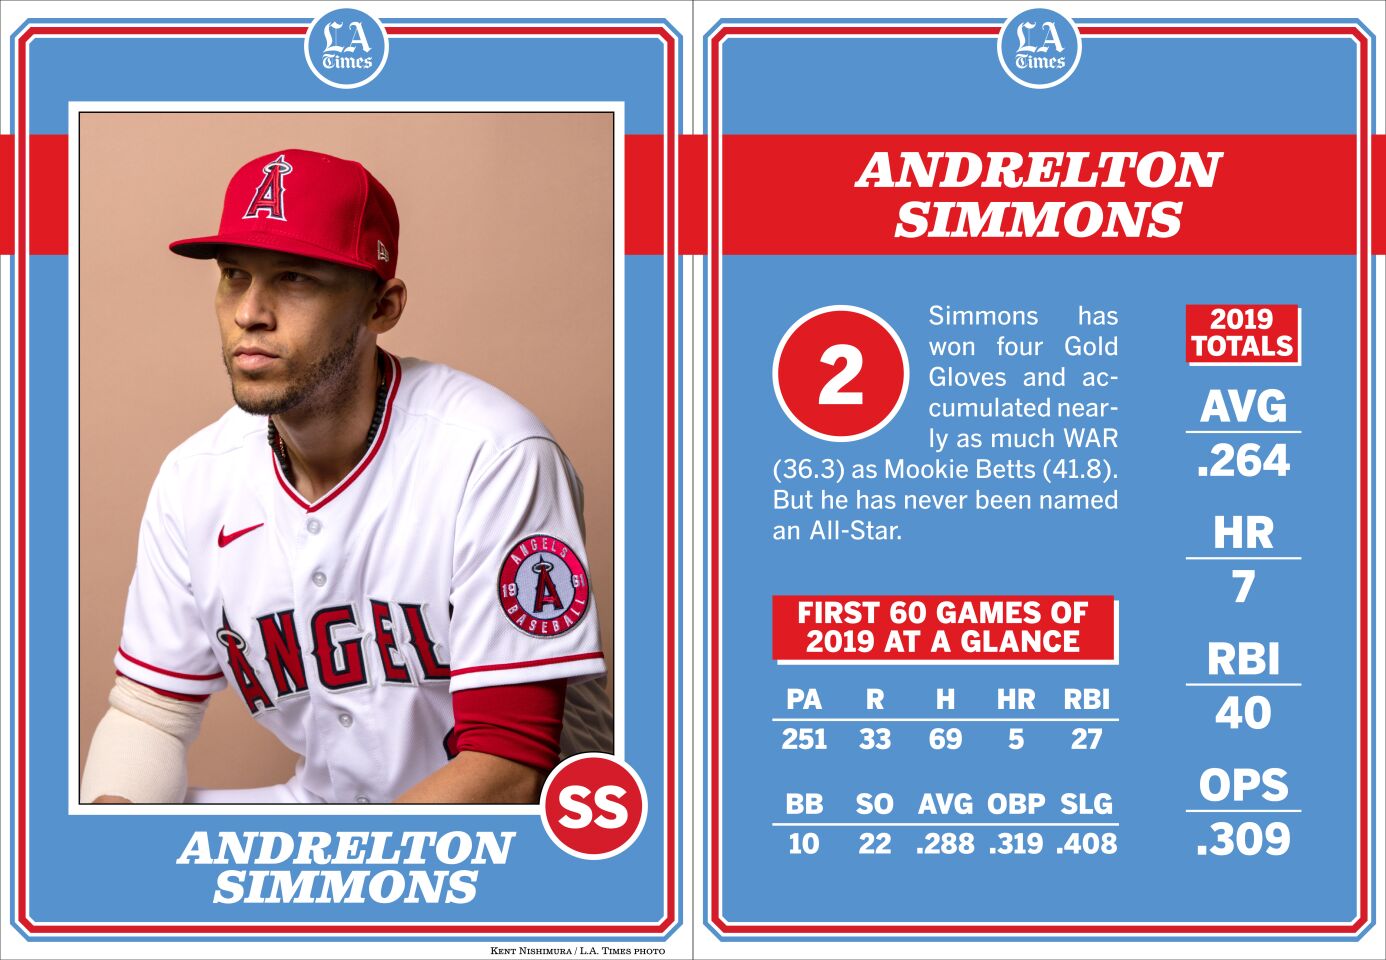 Andrelton Simmons, Angels 2020